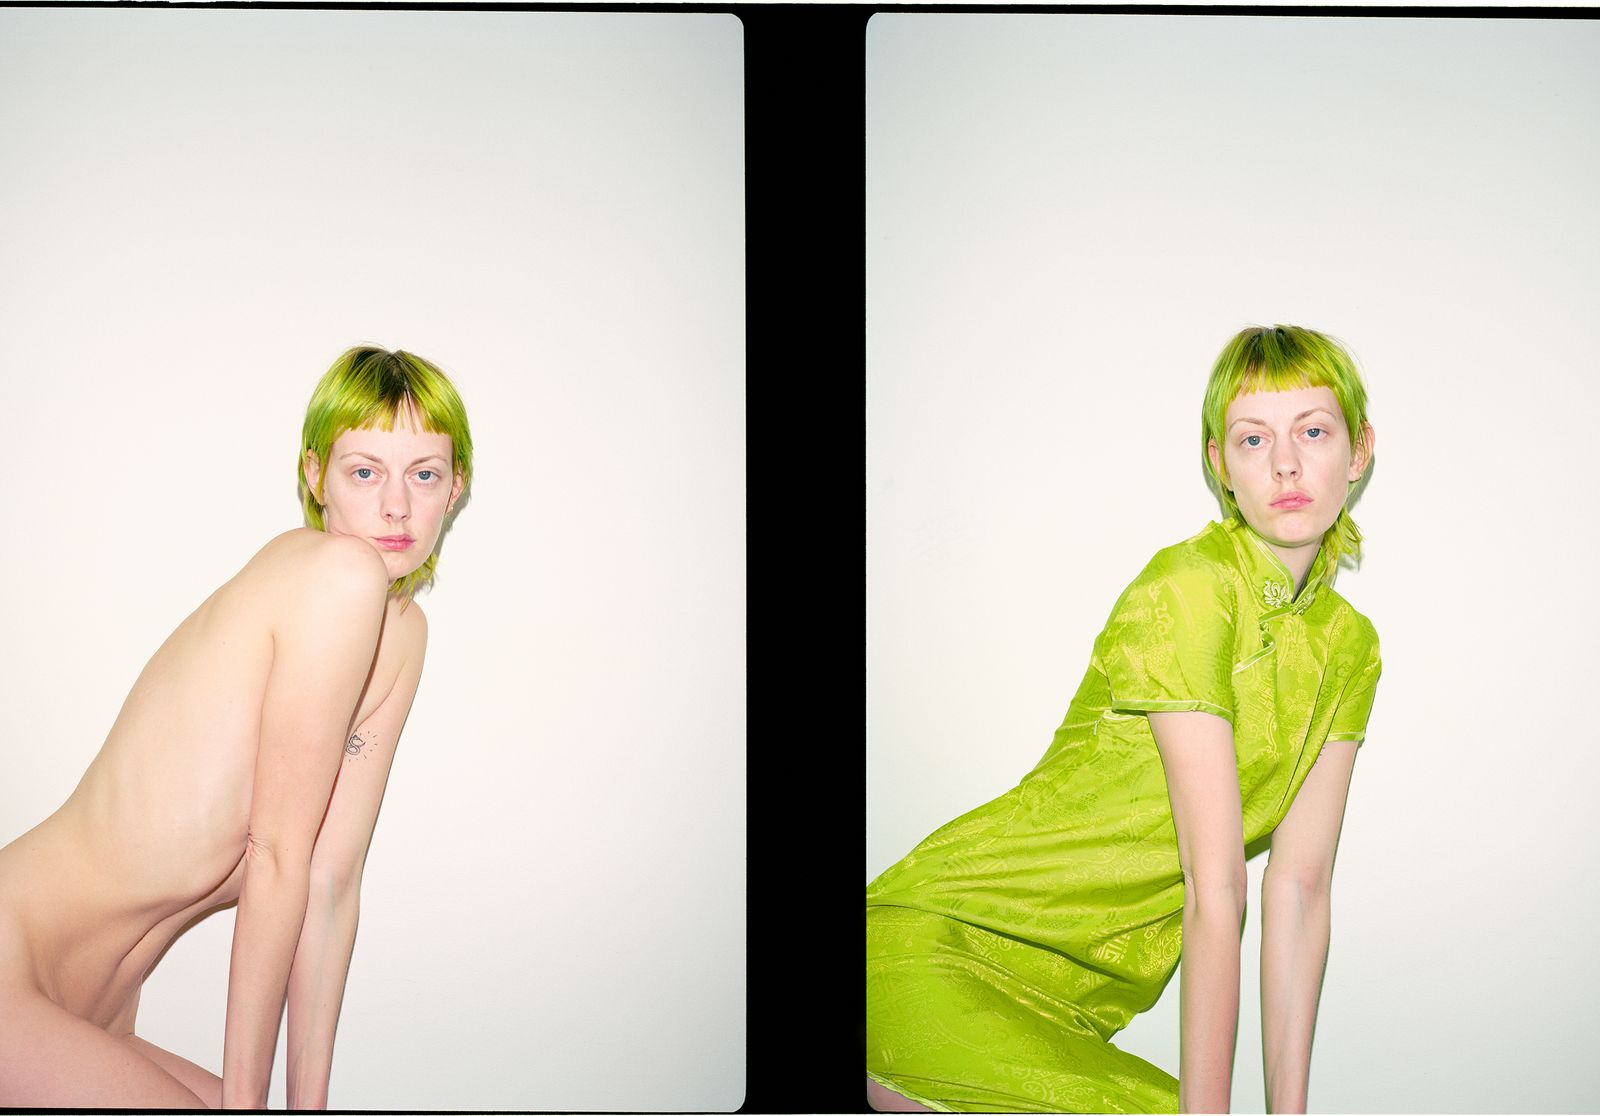 © Matilde Søes Rasmussen - Image from the Unprofessional photography project